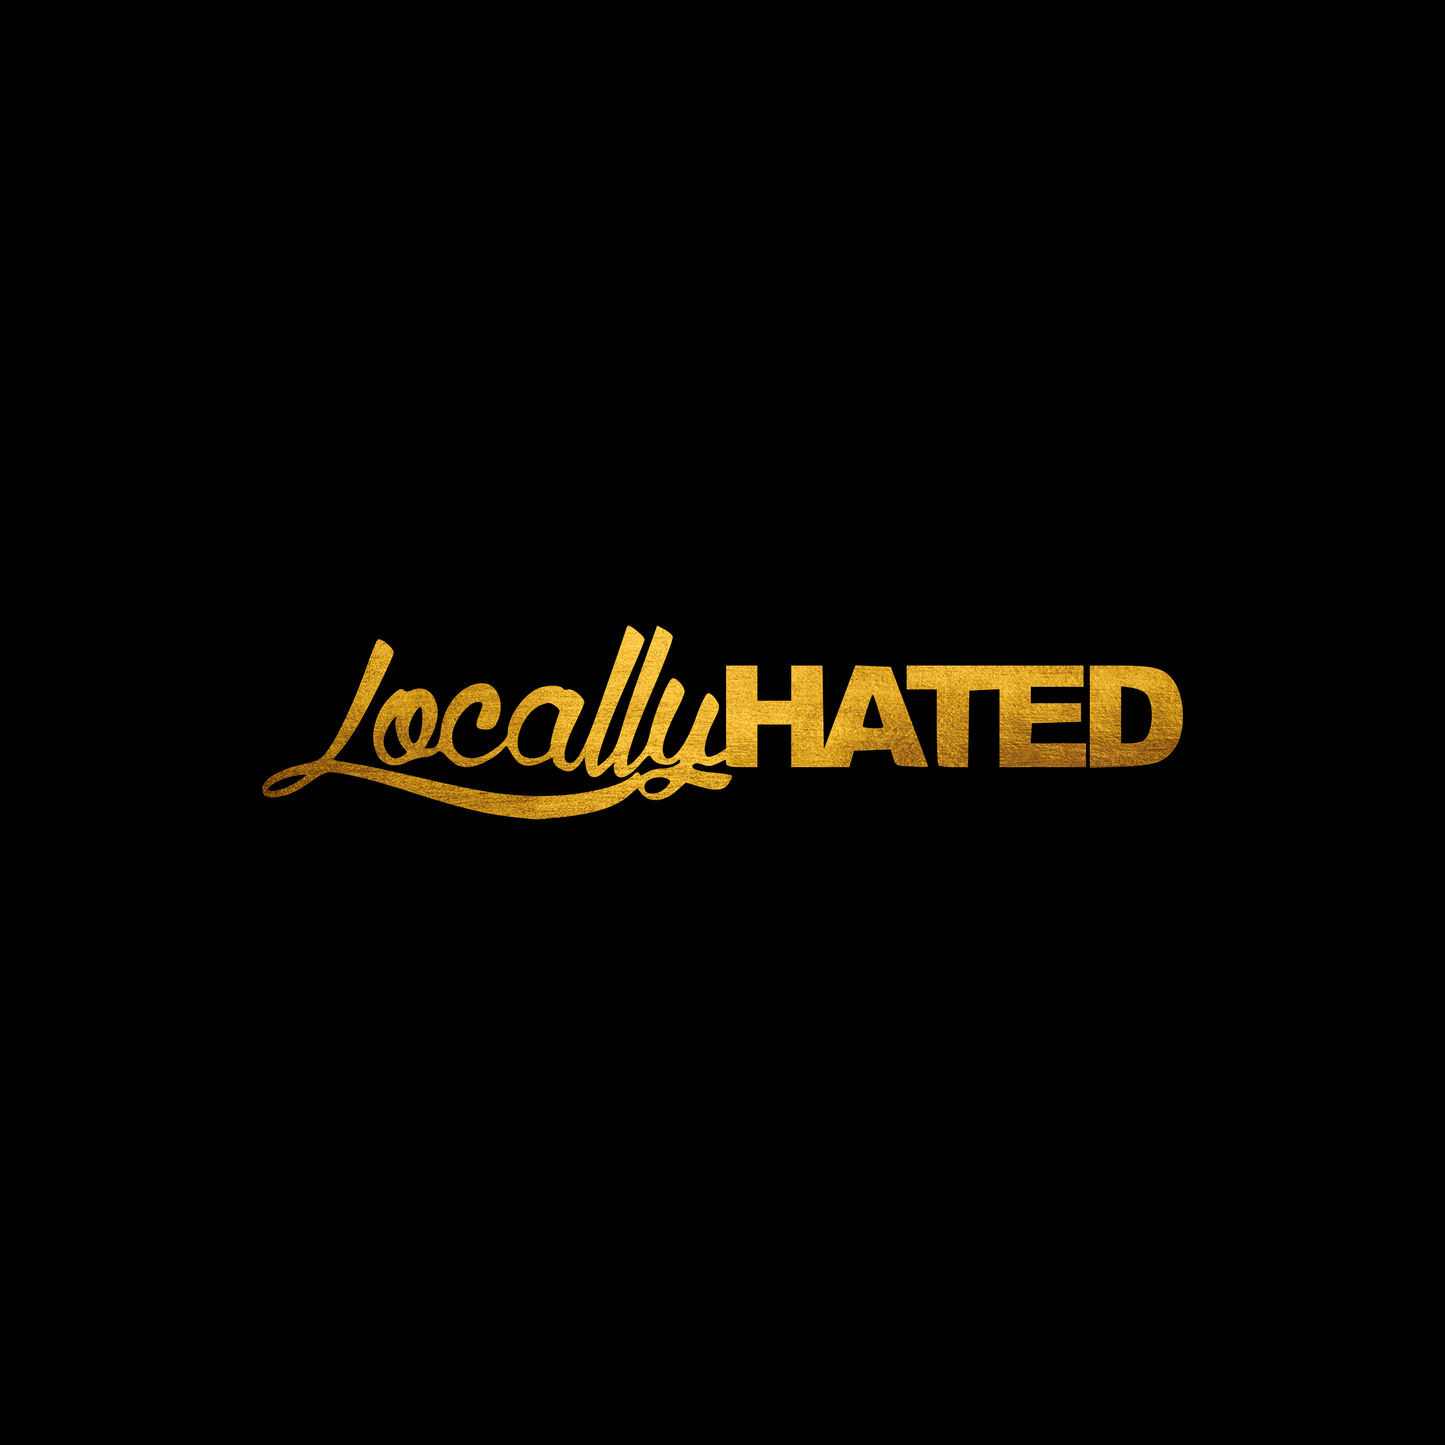 Locally hated sticker decal